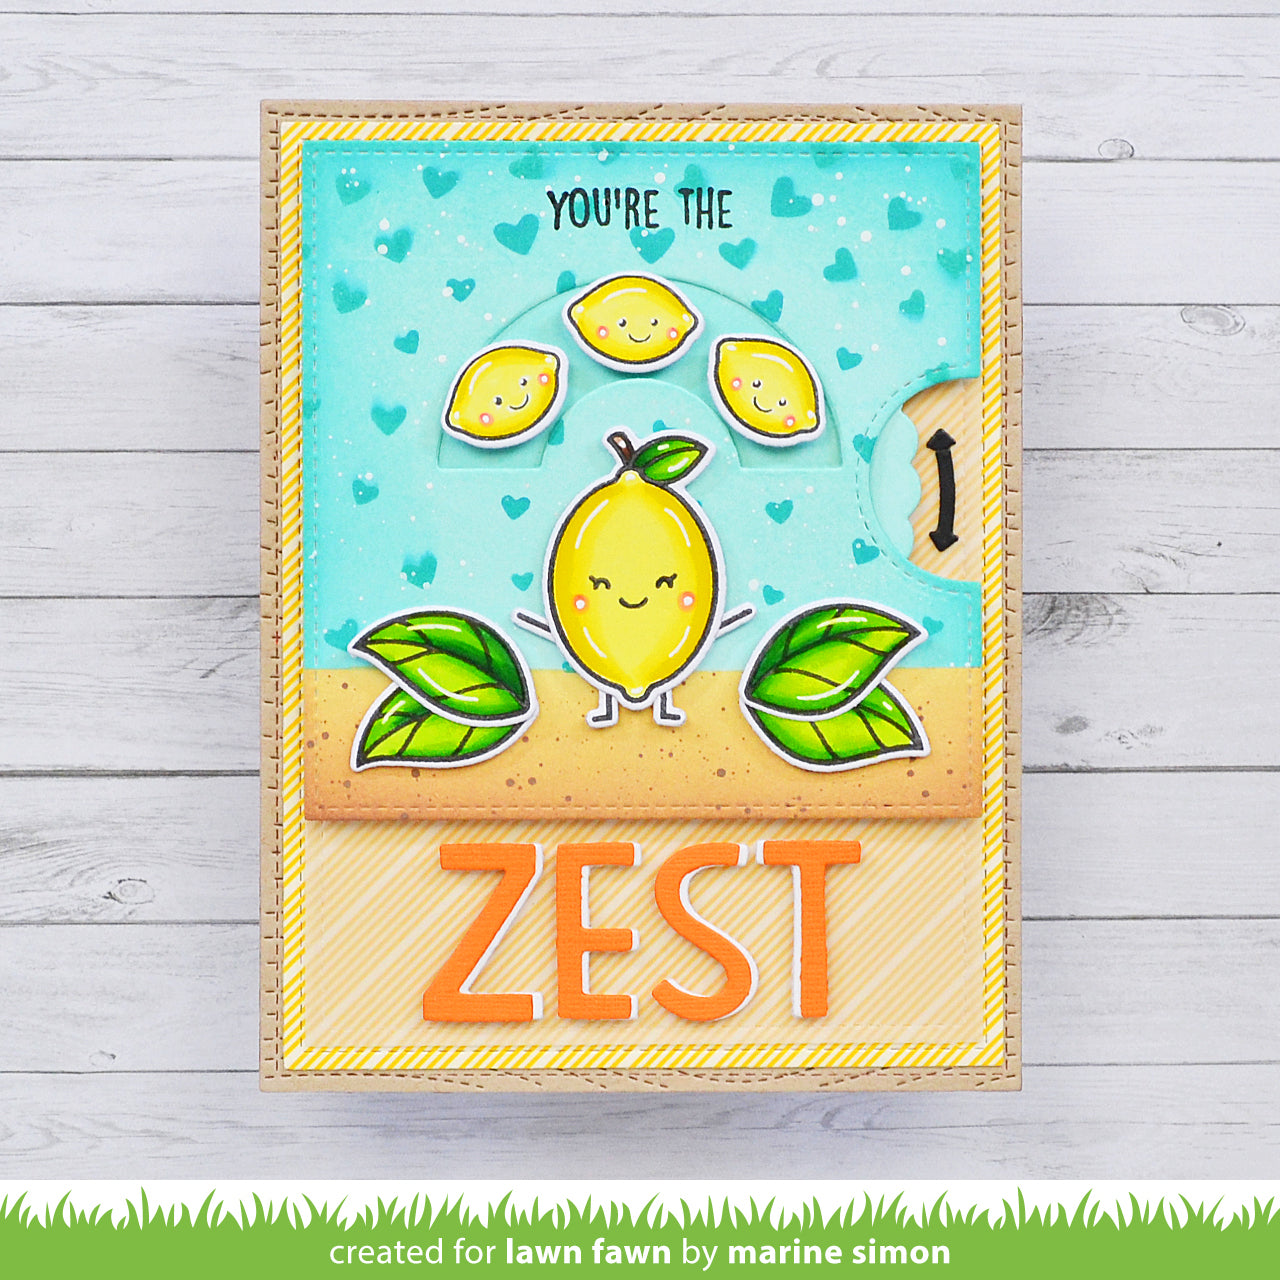 you're the zest